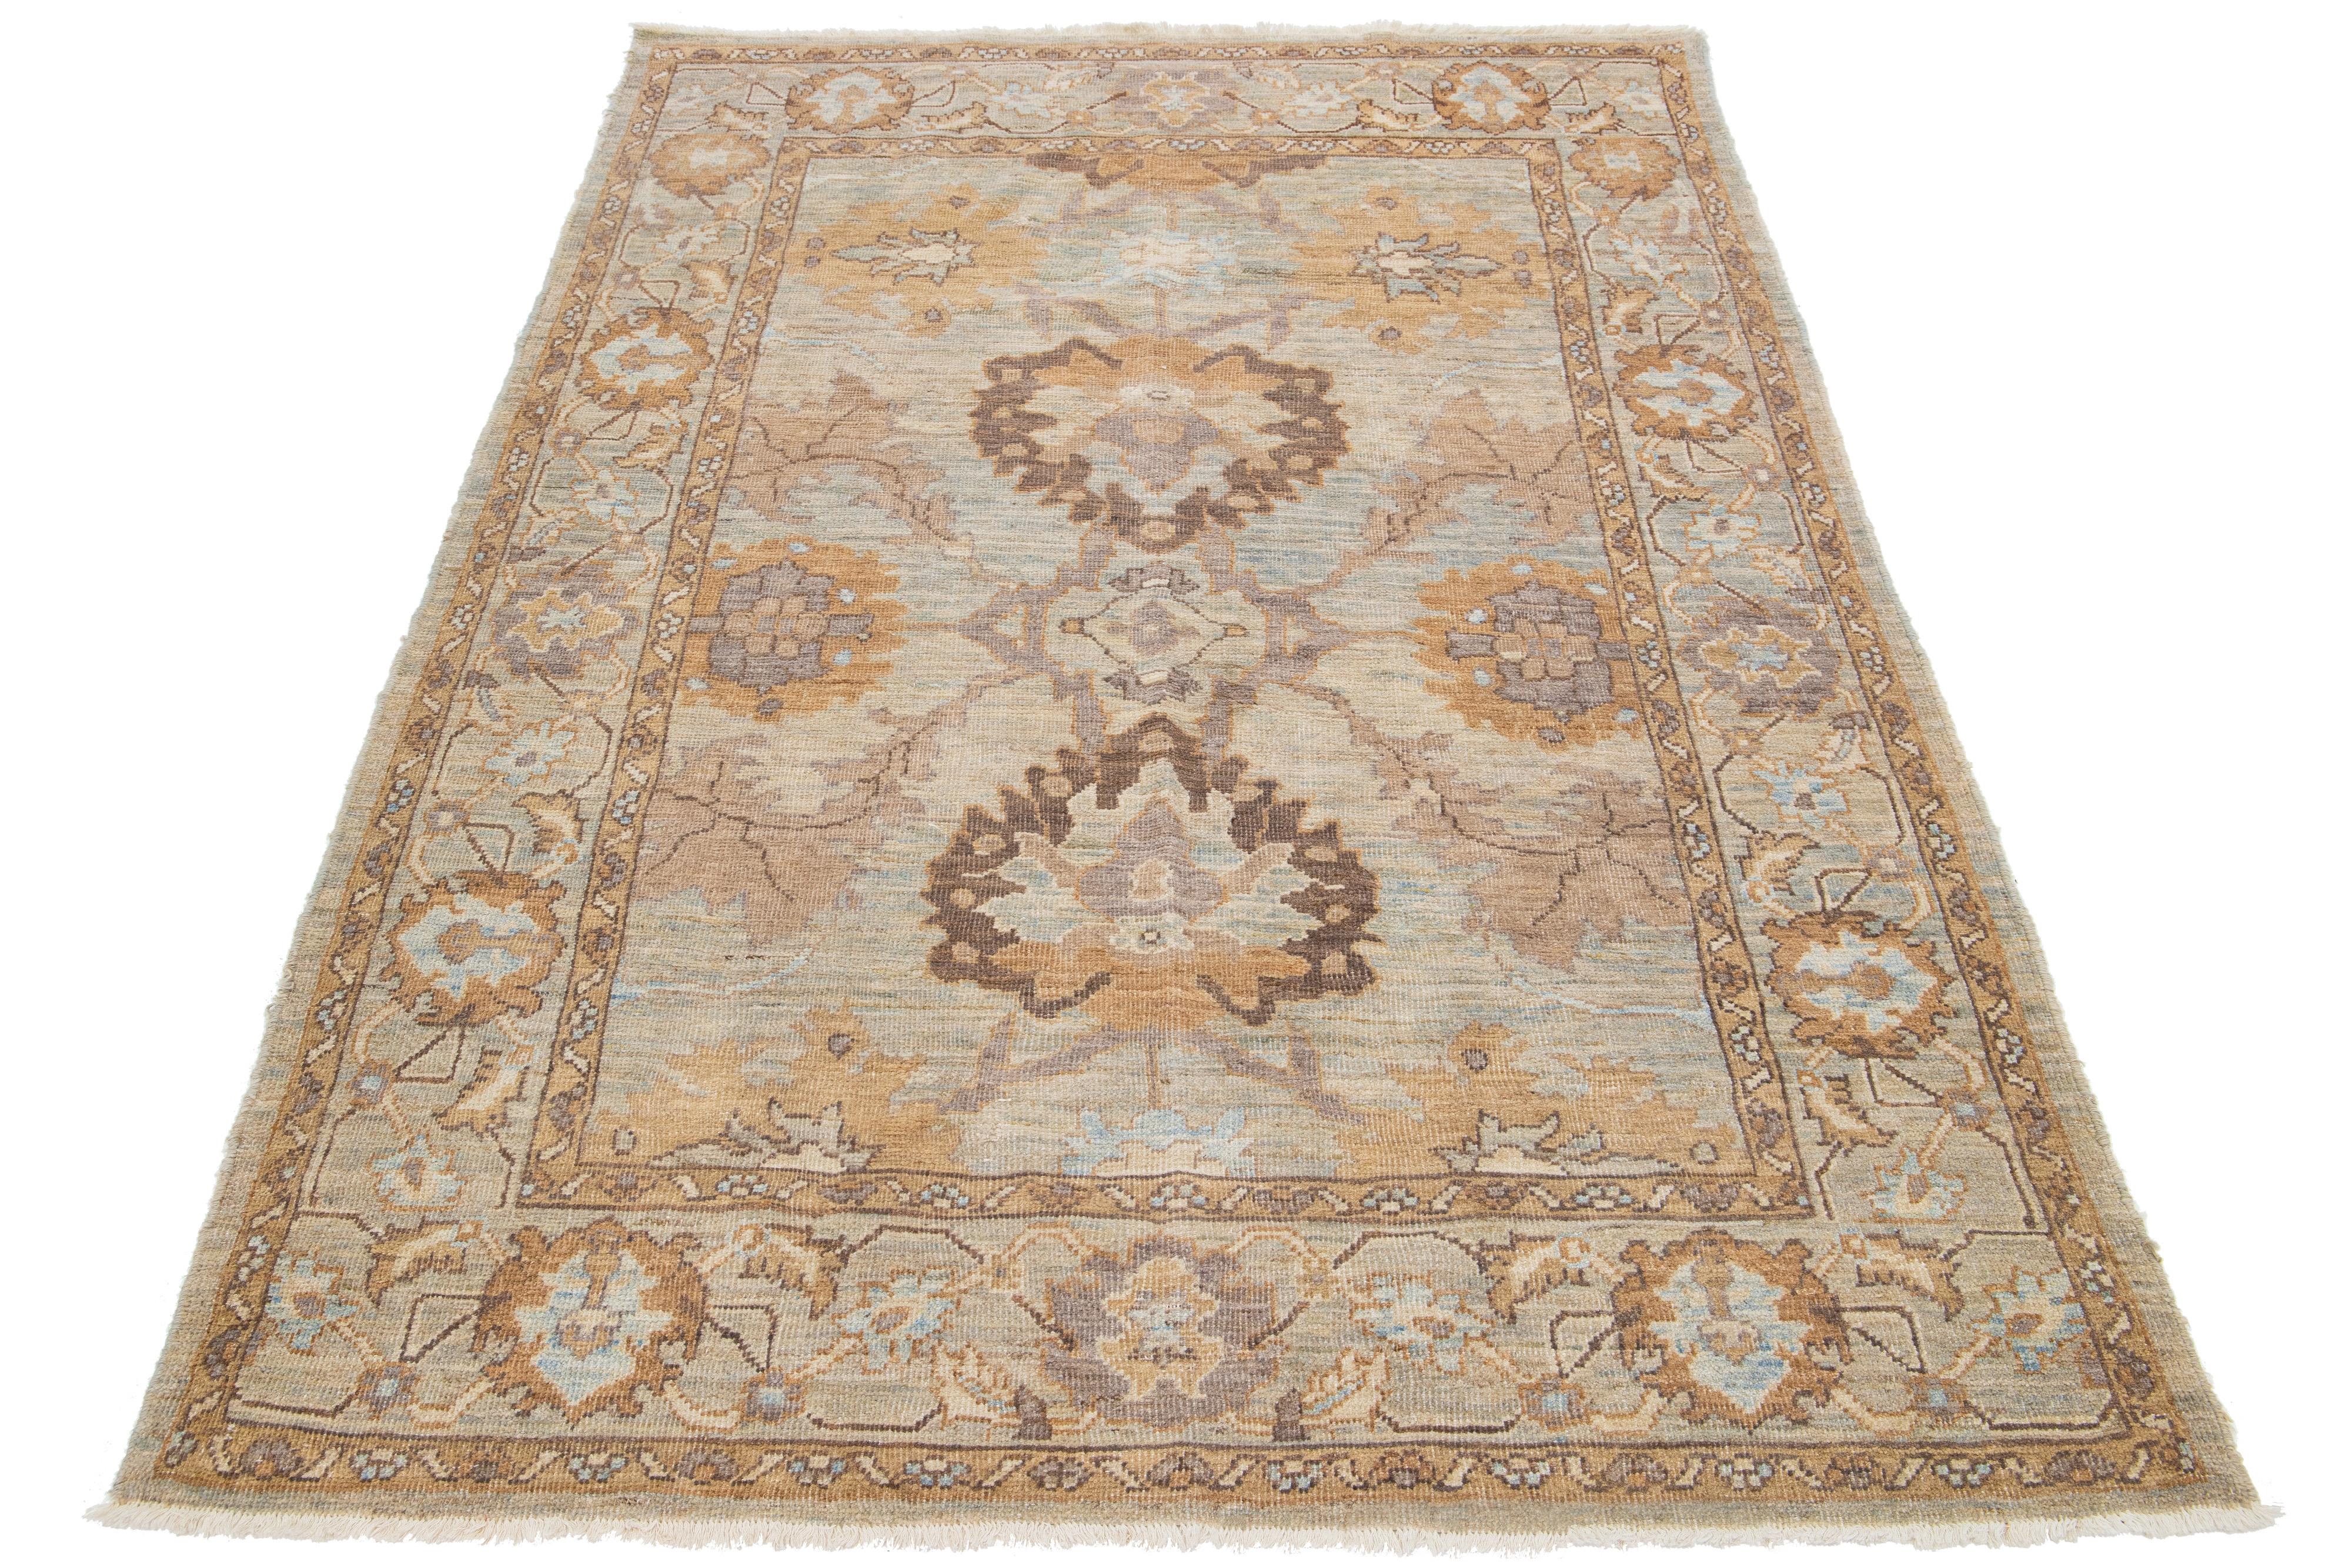 A stunning hand-knotted Sultanabad rug featuring an all-over brown field adorned with light blue, beige, and gray accents.

This rug measures at 5'1